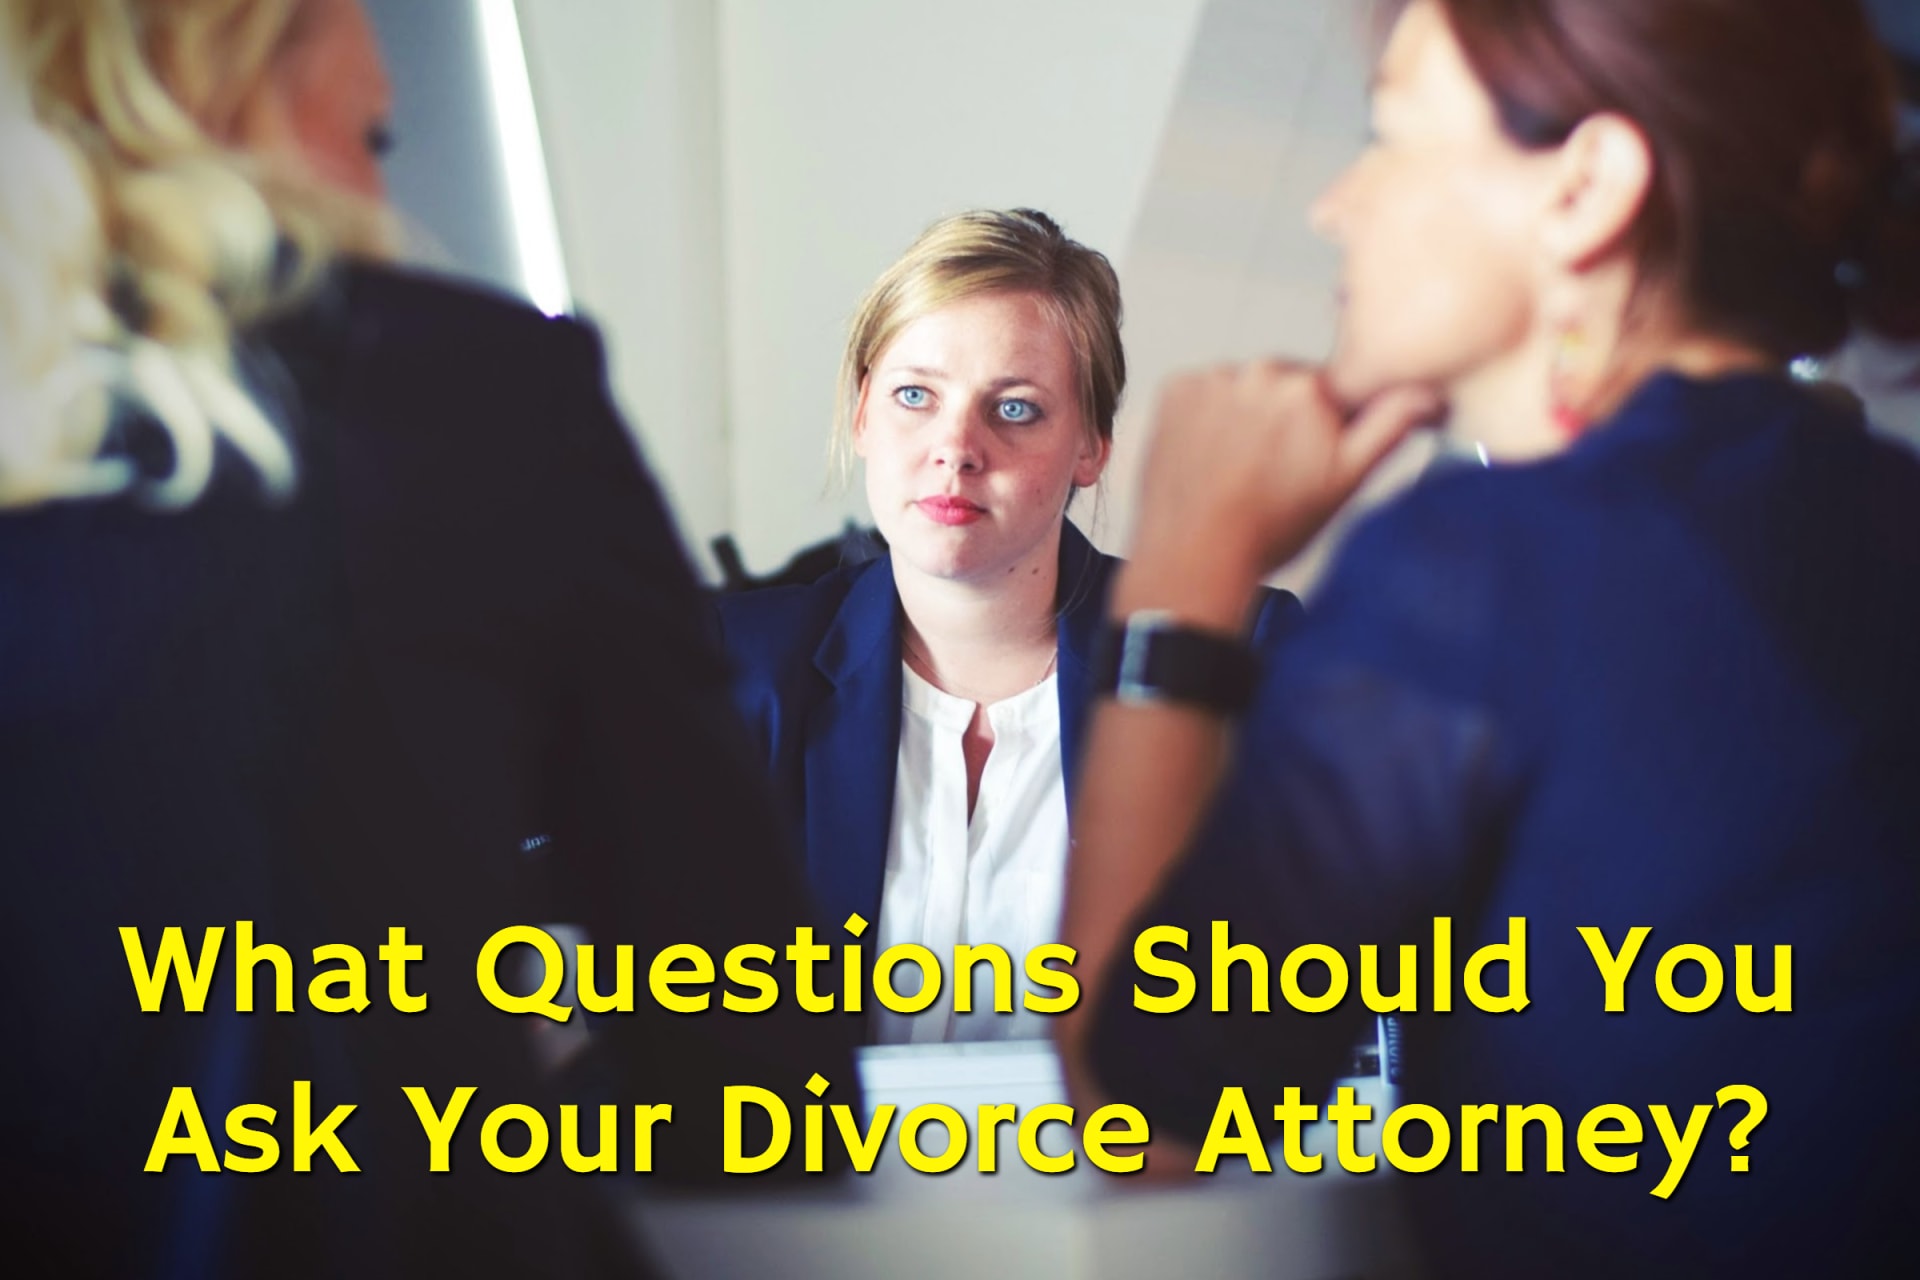 A woman consulting with her attorneys and contemplating which questions to ask a divorce attorney